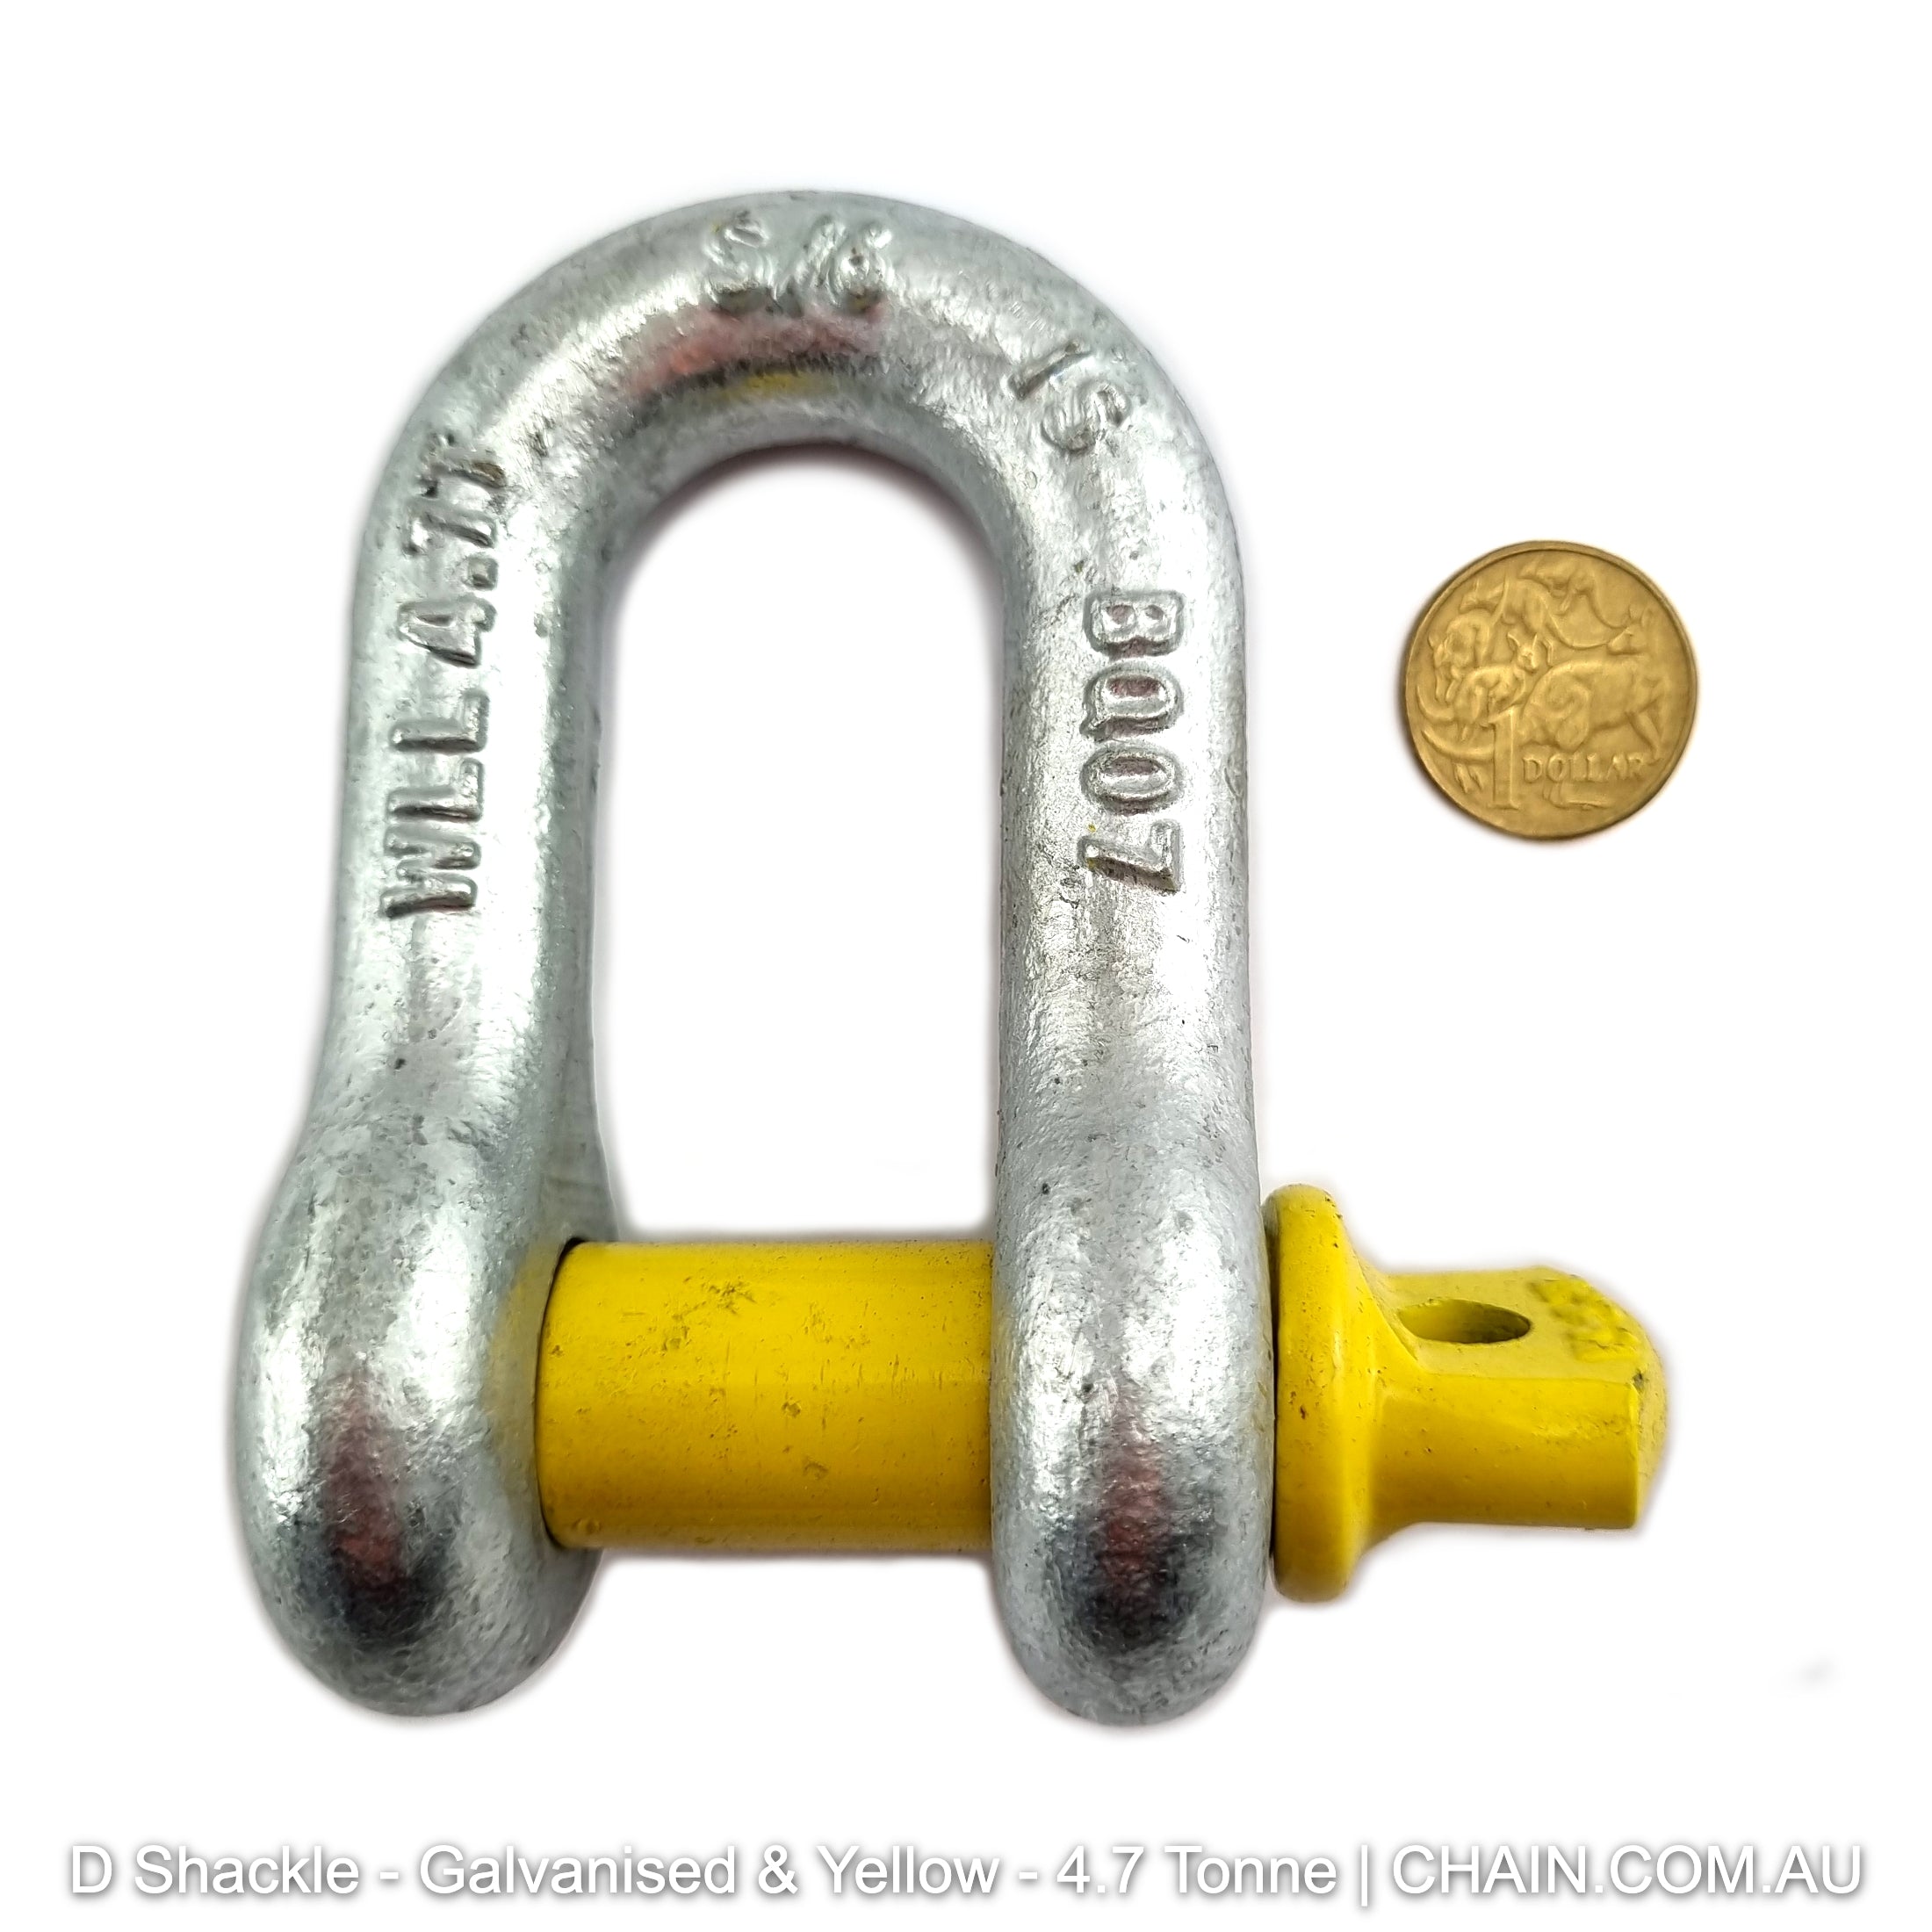 4.7 Tonne Rated (4700kg) Galvanised and yellow D shackles, grade S, rated D shackle. Australia wide shipping. Shop hardware chain.com.au